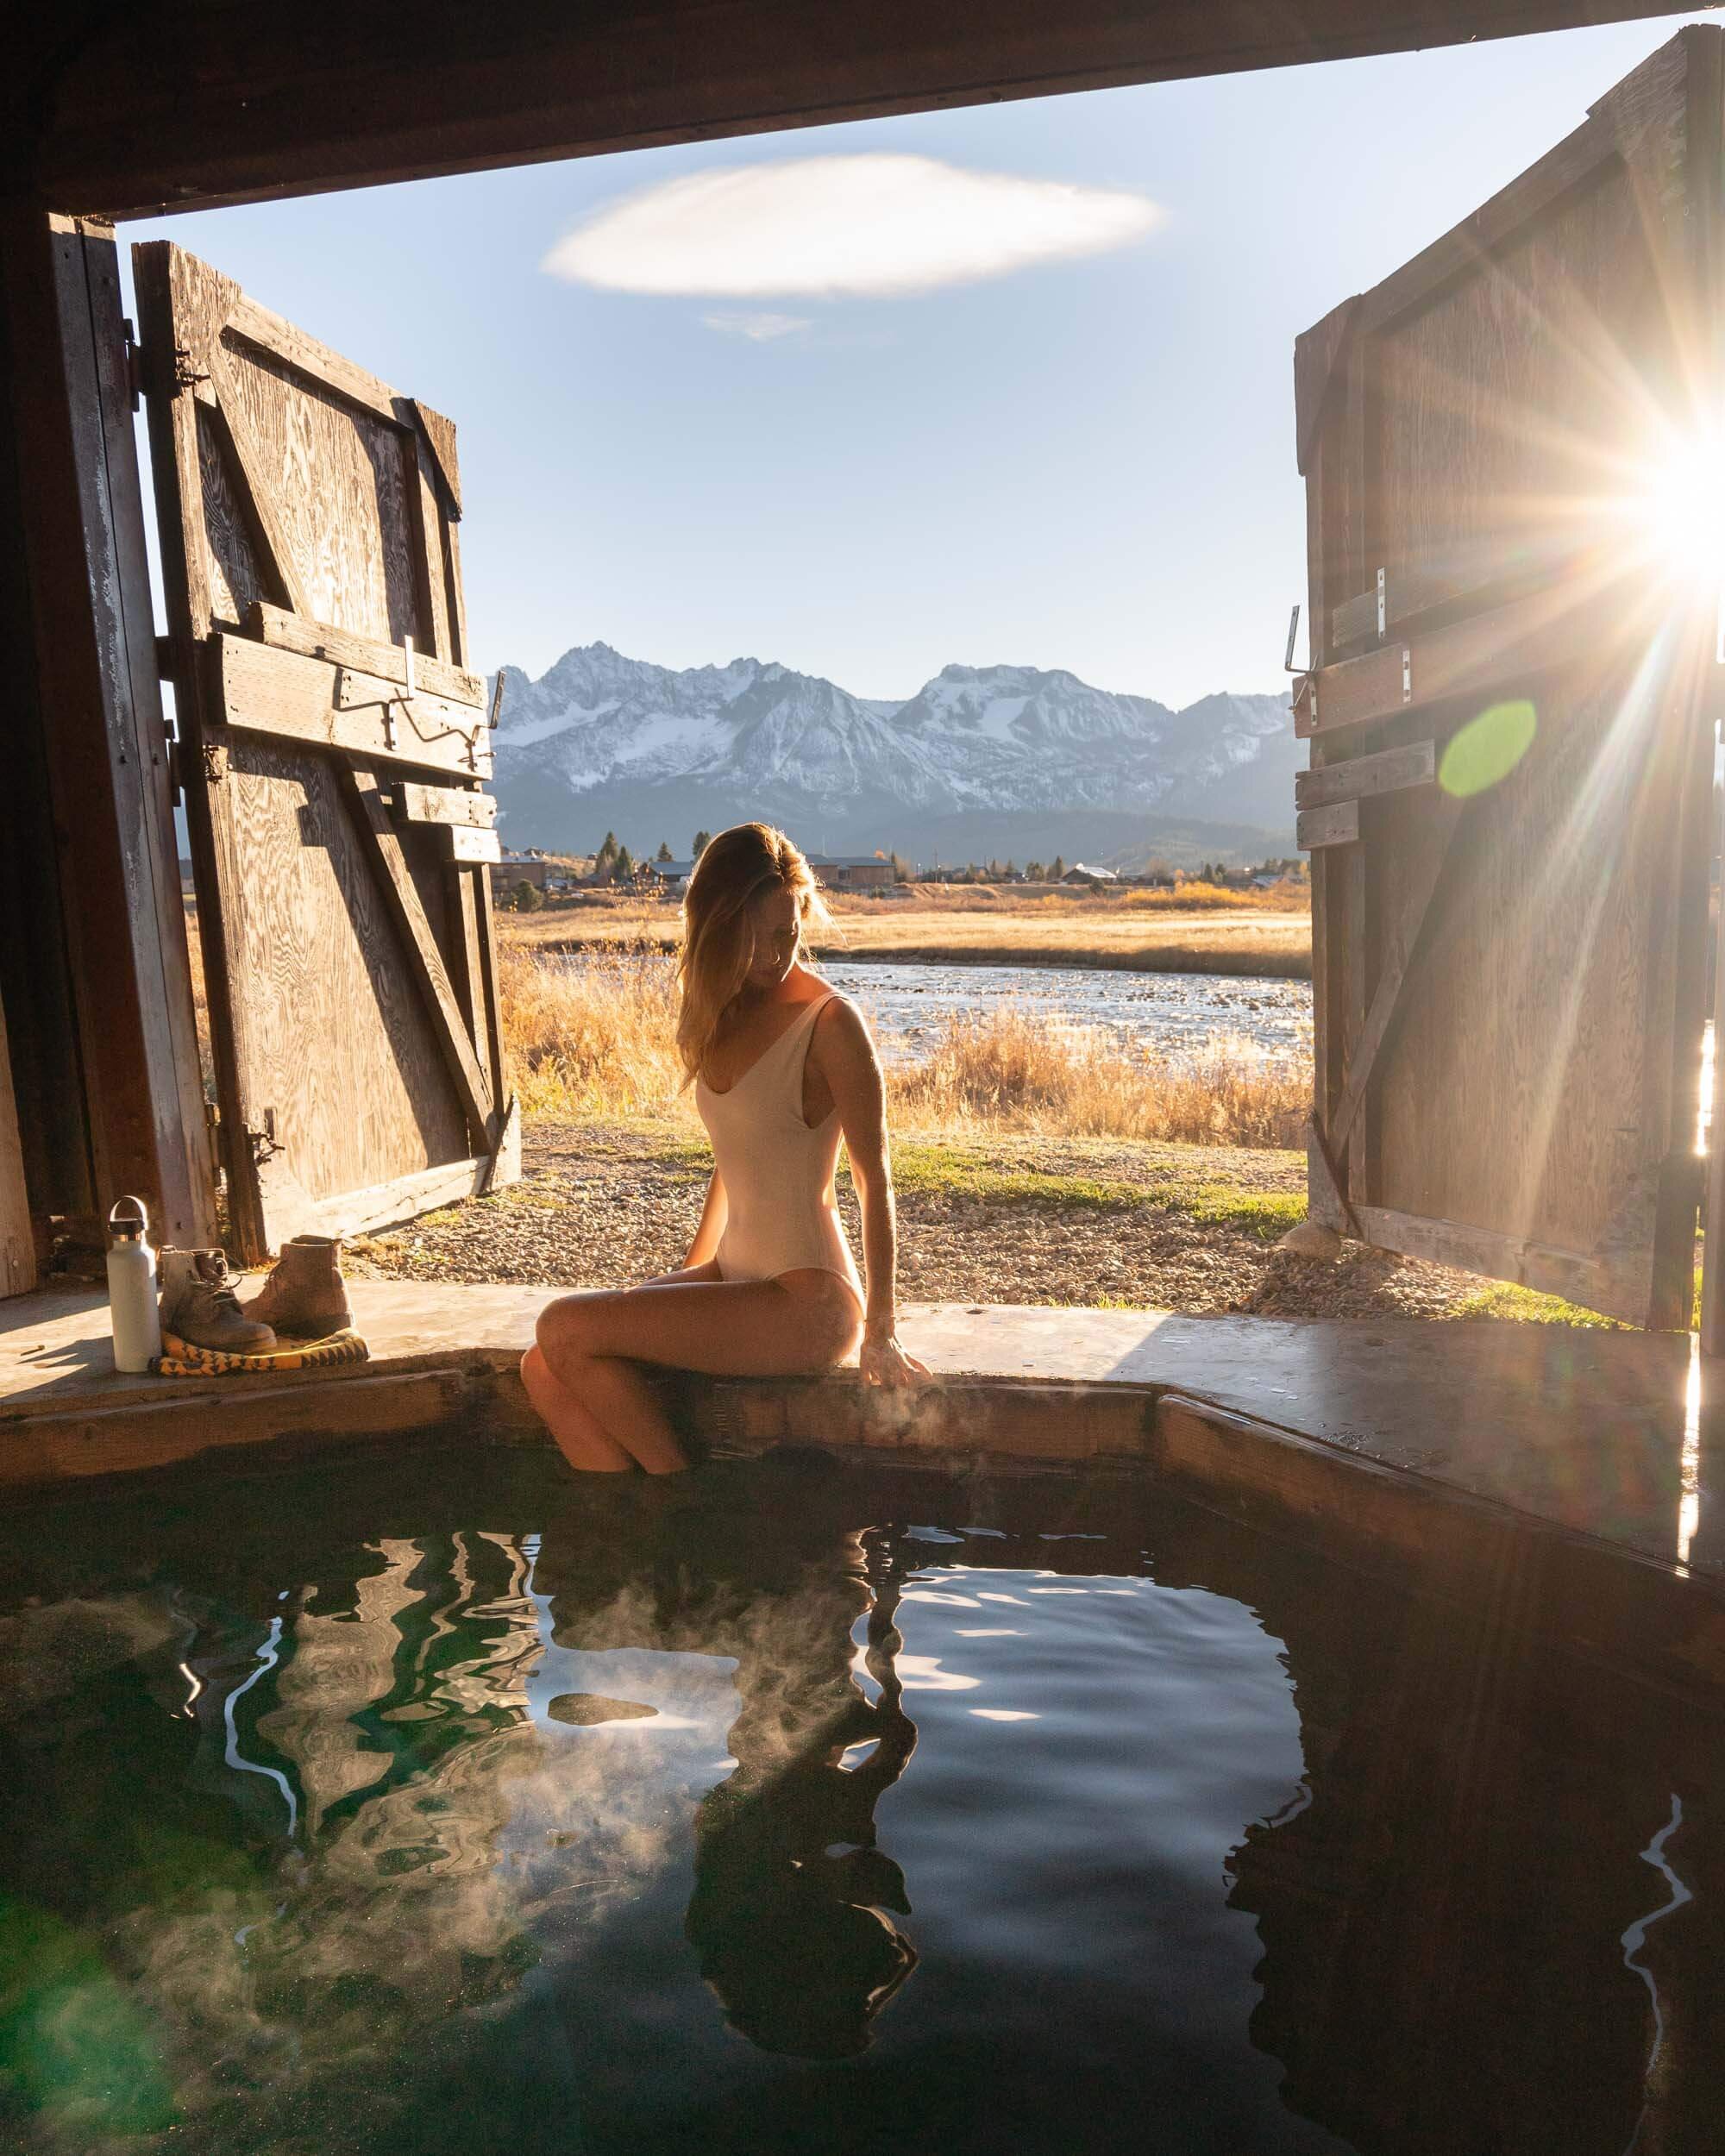 The hot spring at Mountain View Resort is set up in a small shed with beautiful views of the Sawtooth Mountains in the distance.